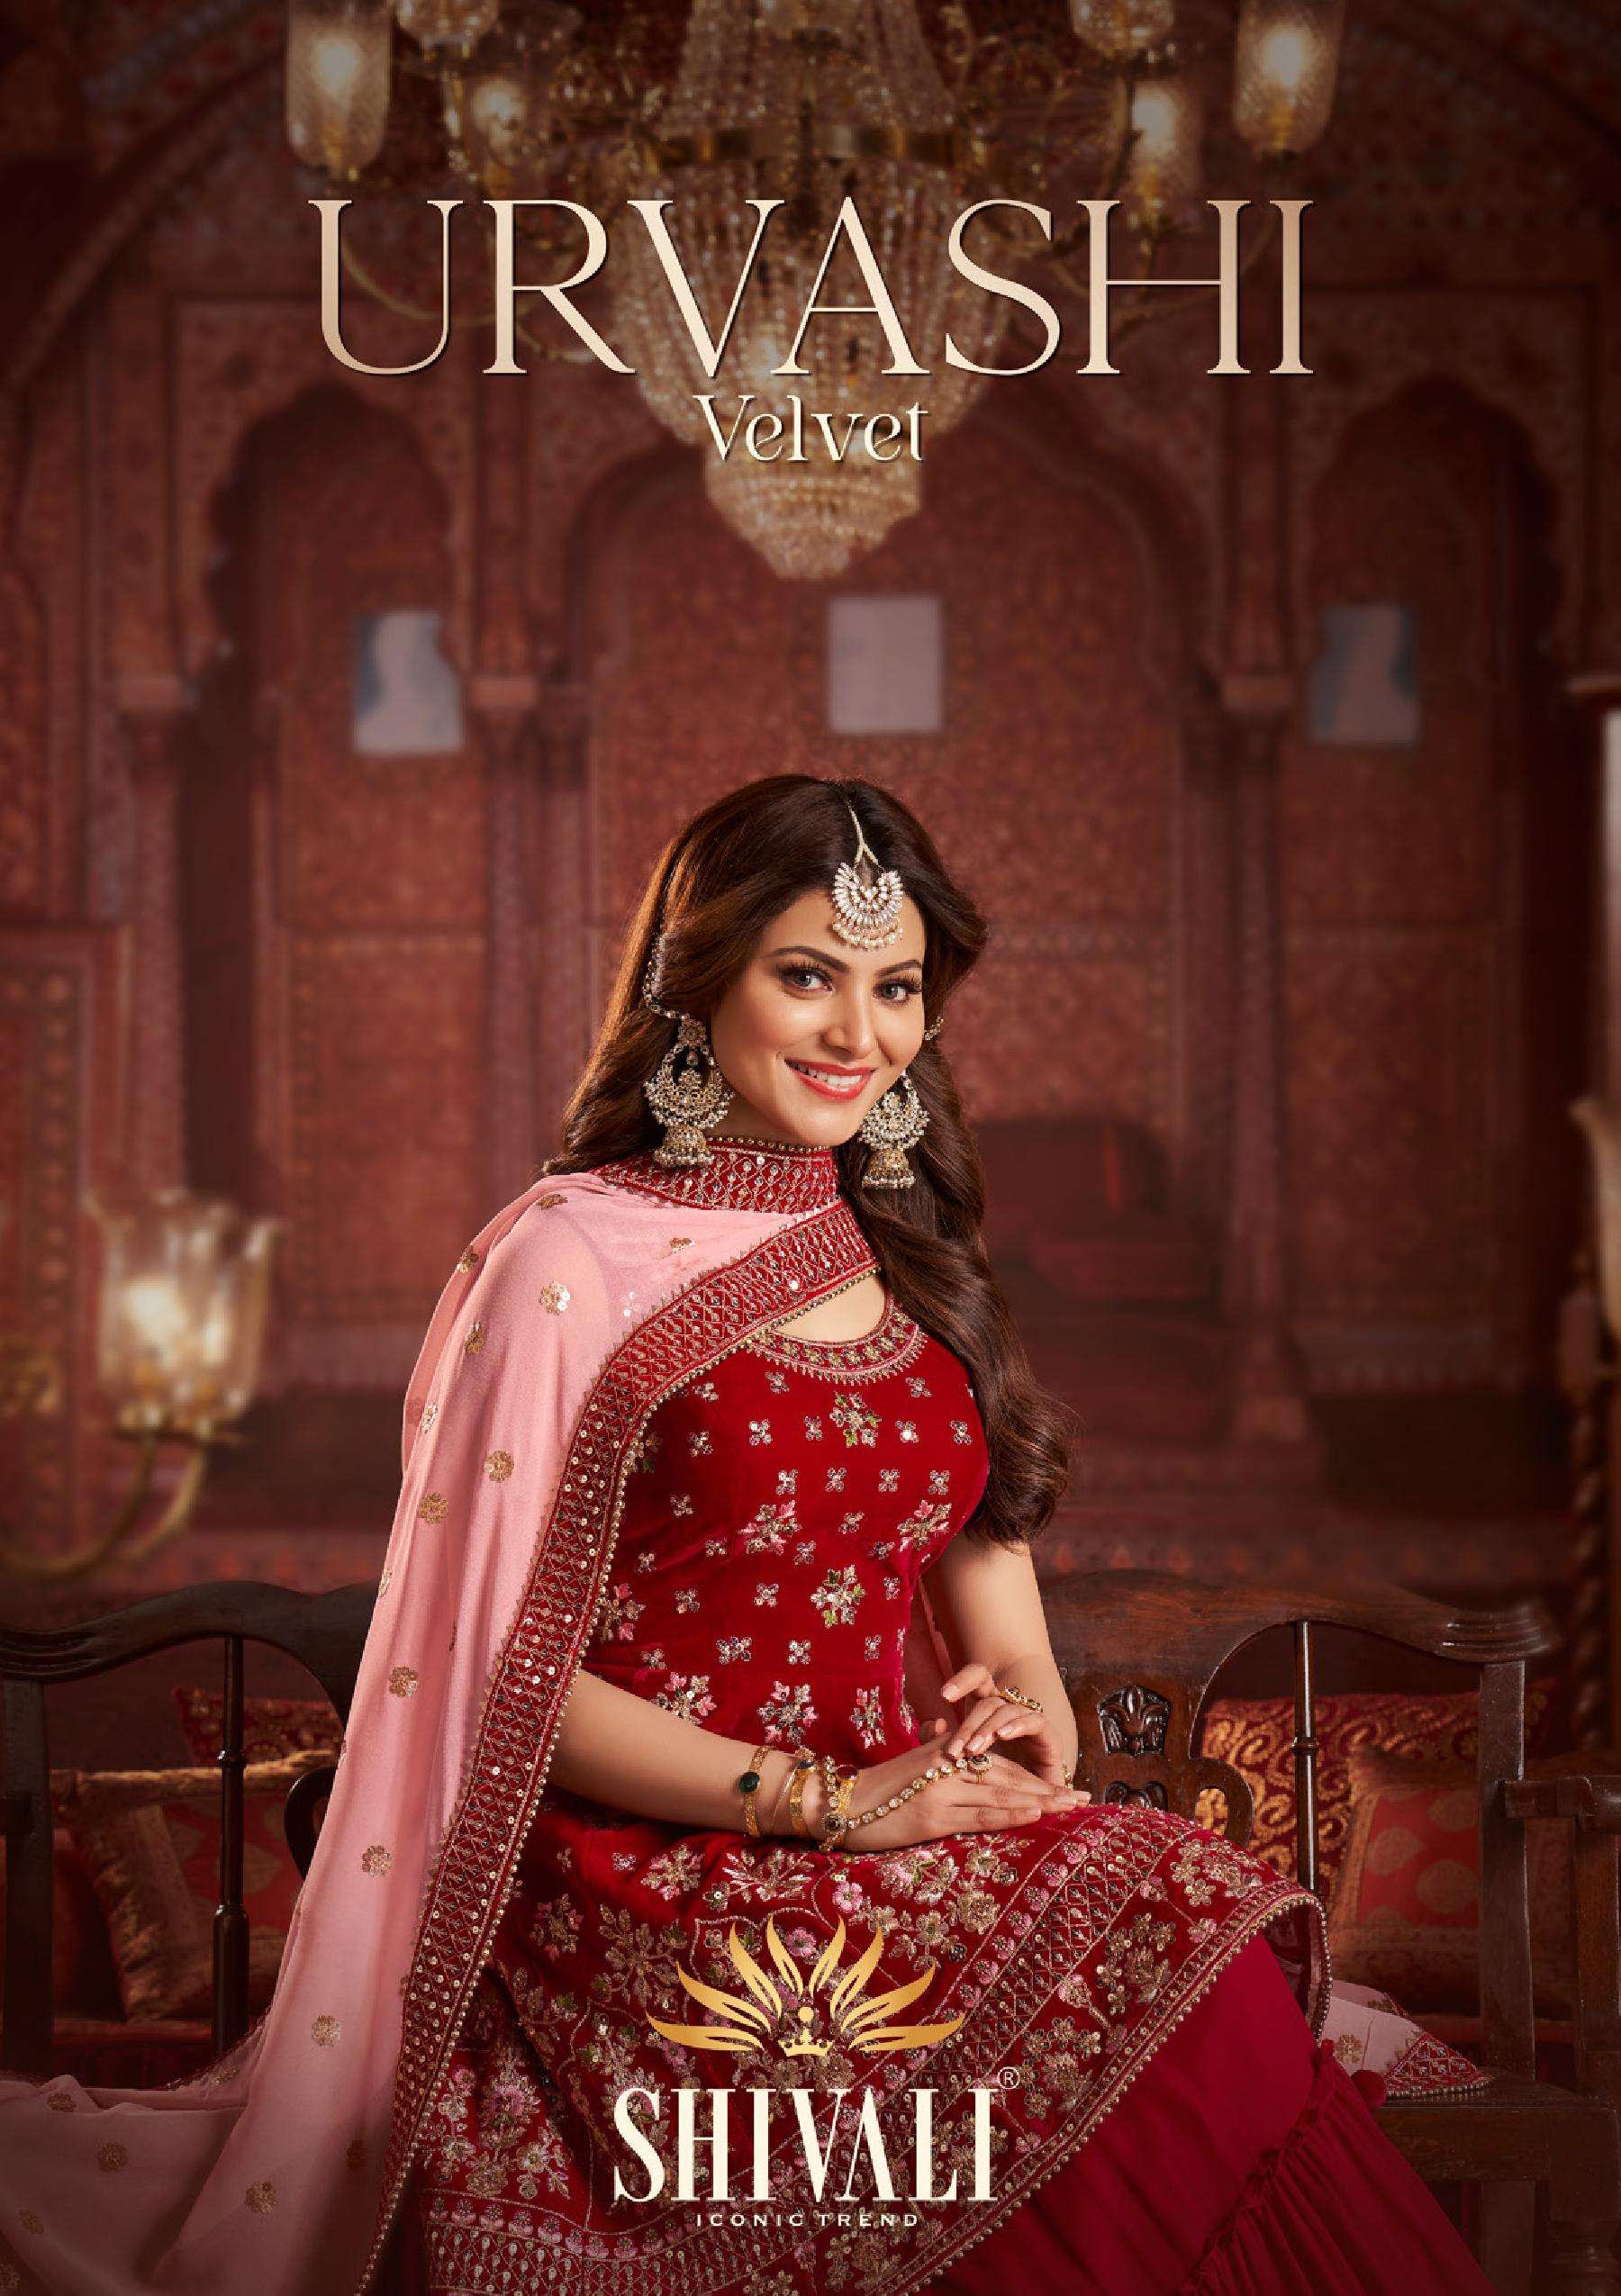 shivali presents urvashi velvet heavy designer special eid collection vevet gown style readymade collection